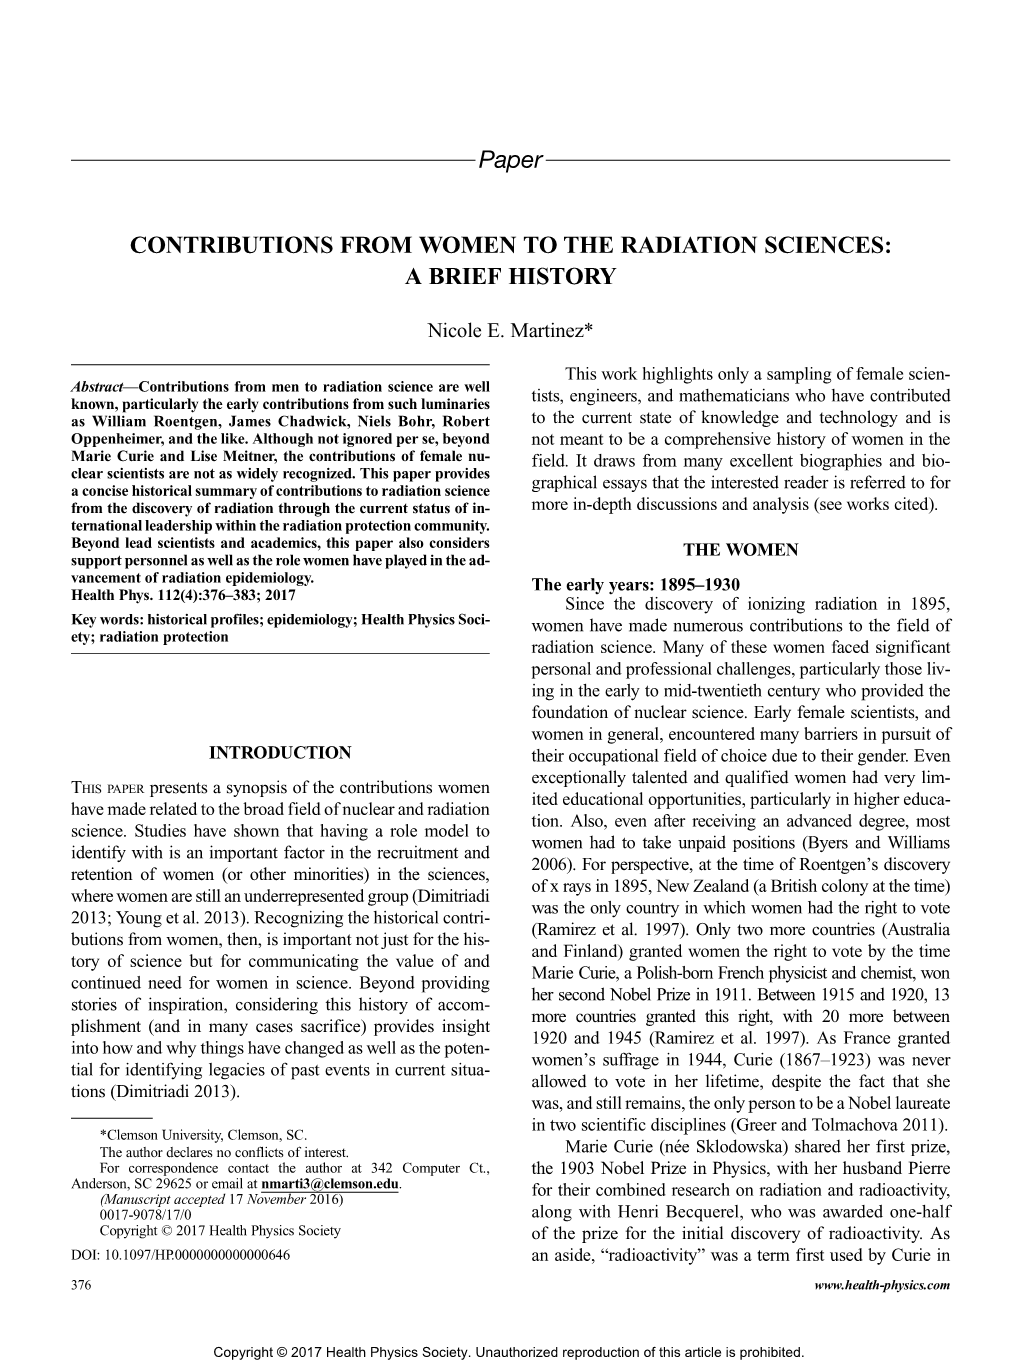 Paper CONTRIBUTIONS from WOMEN to the RADIATION SCIENCES: a BRIEF HISTORY